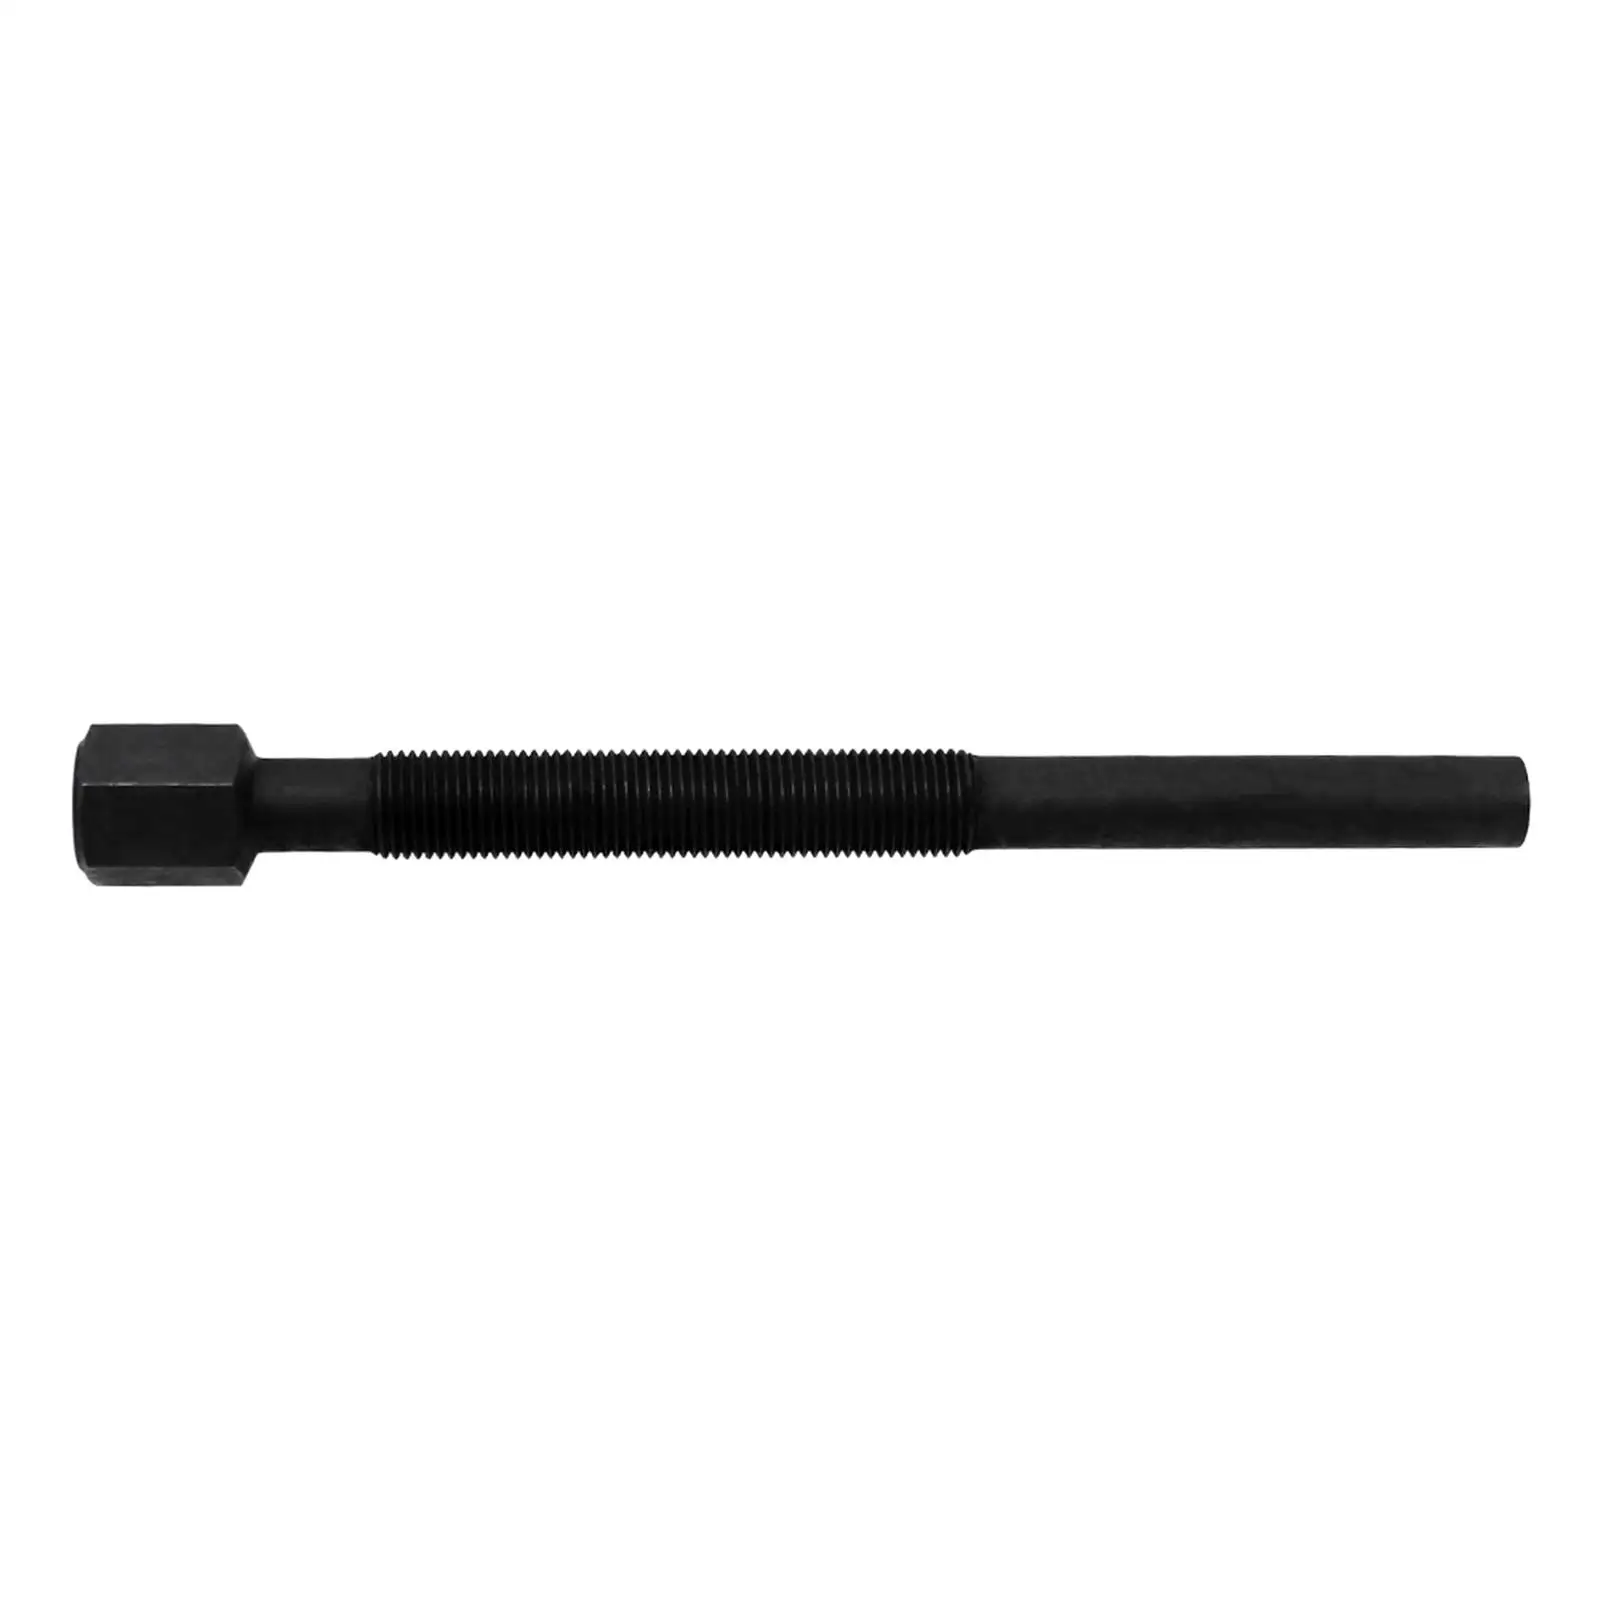 Clutch Puller Removal Tool Hardened Alignment Tools Black Clucth Puller for John Deere 620i 850D COMET Primarytx Replaces